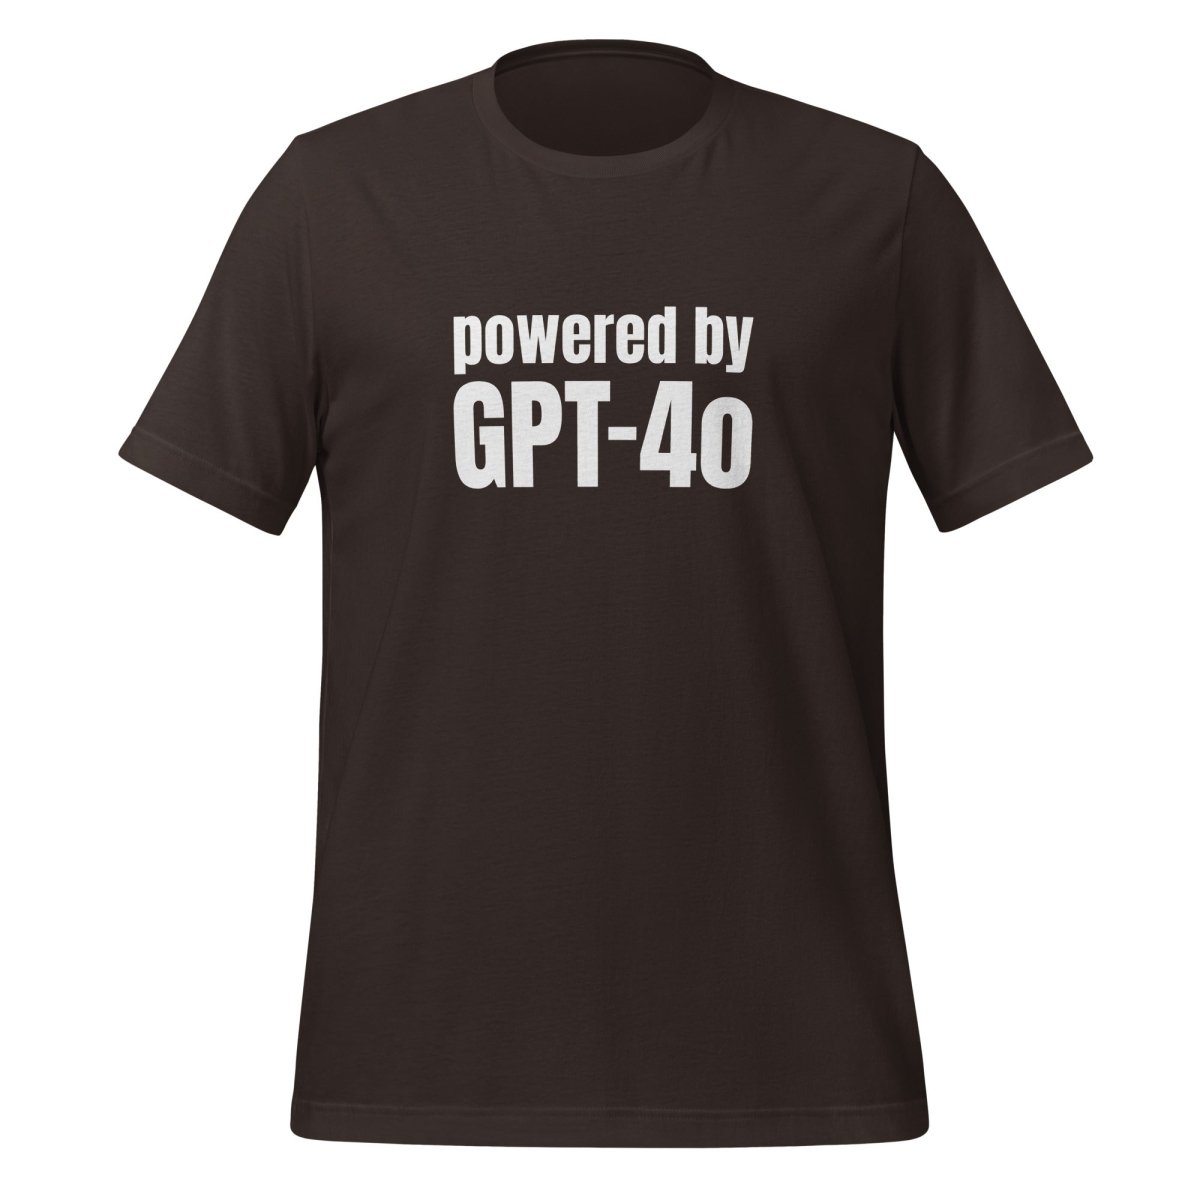 Powered by GPT - 4o T - Shirt (unisex) - Brown - AI Store